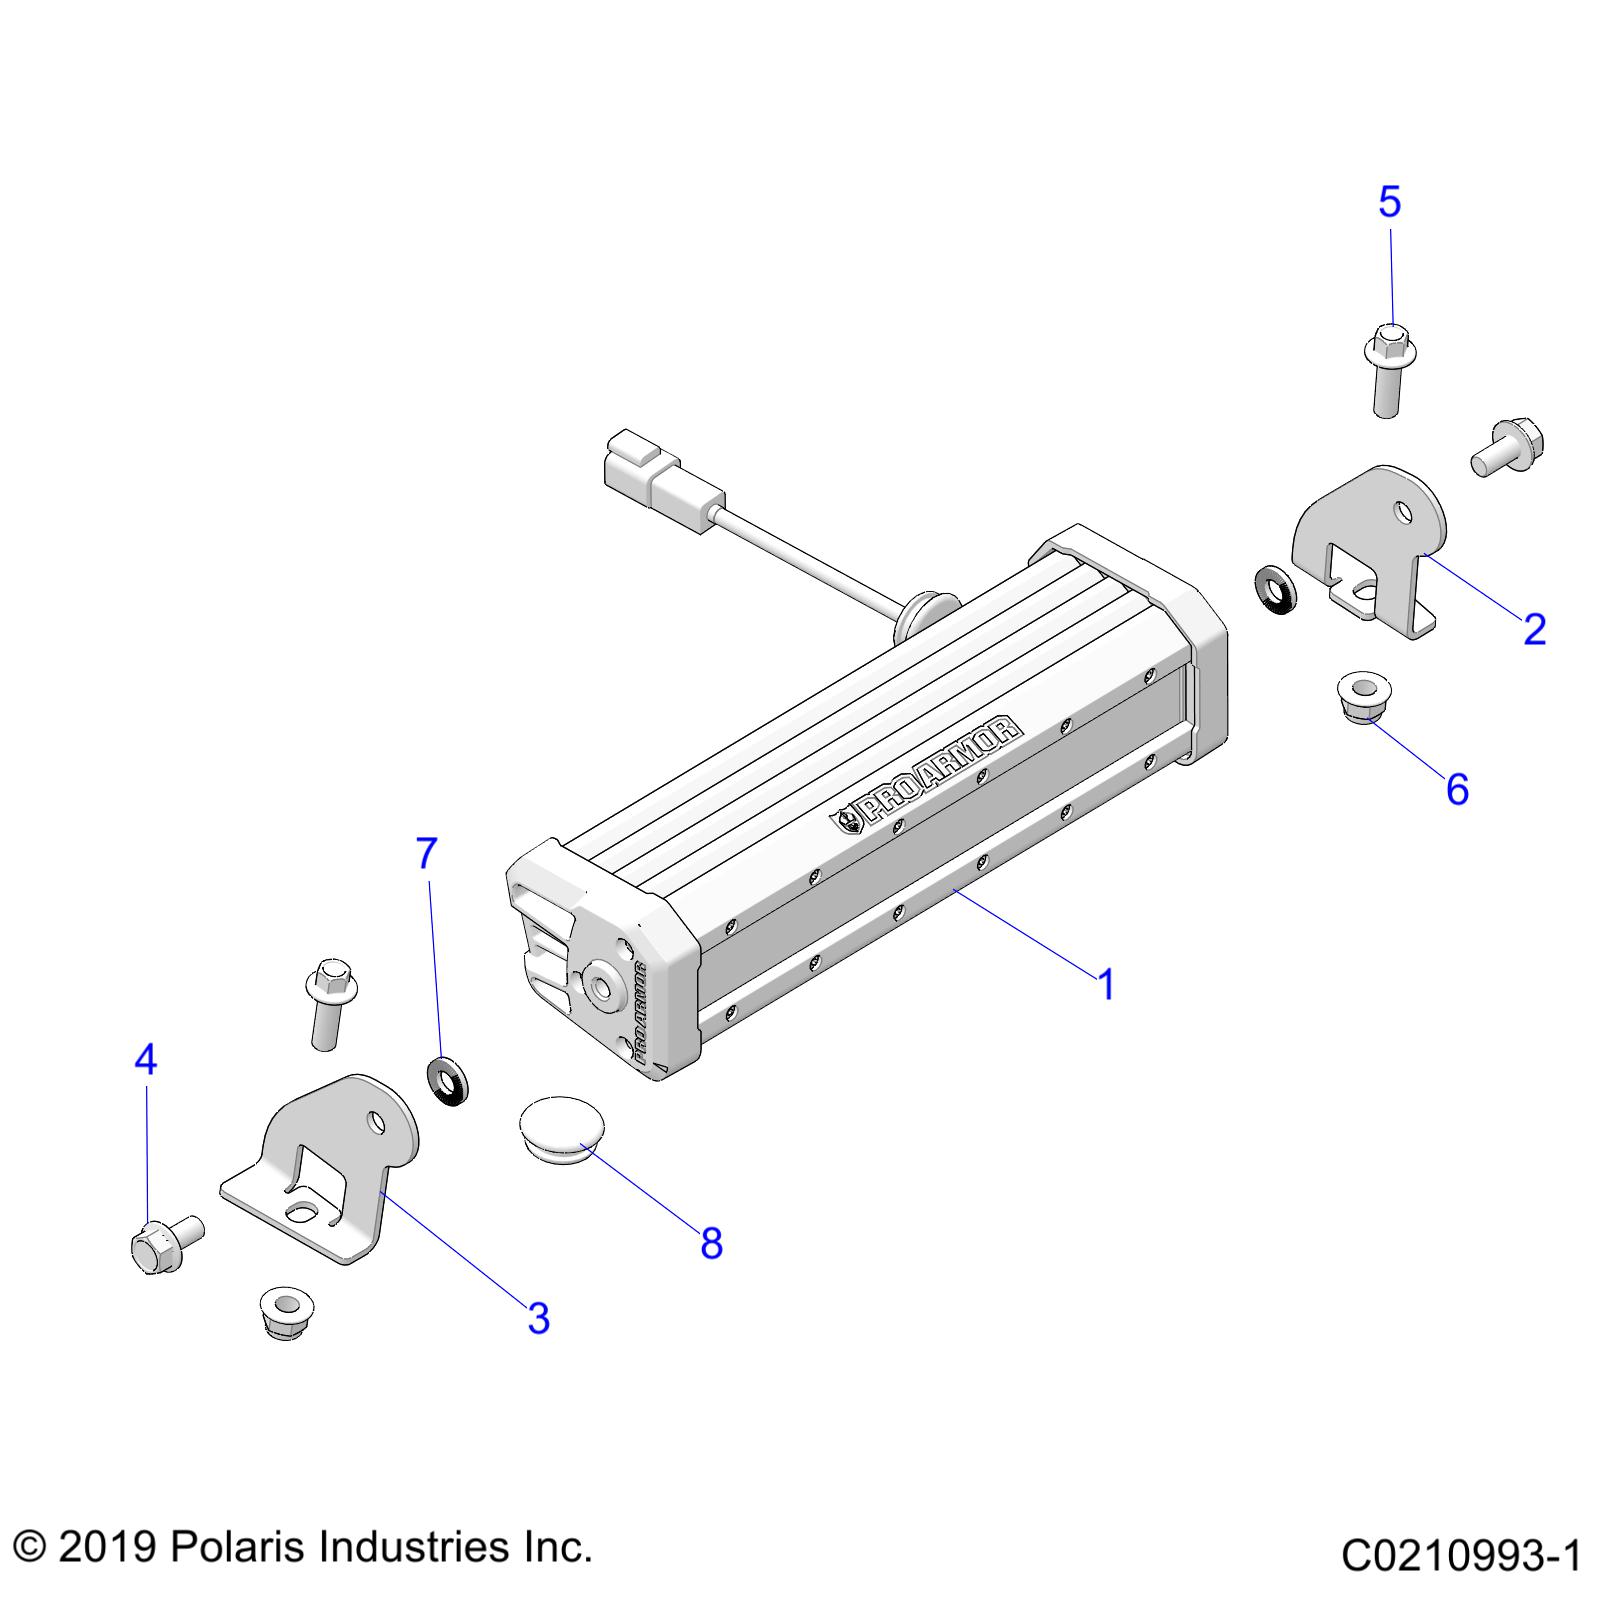 Part Number : 7557171 WASHER-LOCK DUAL SIDED